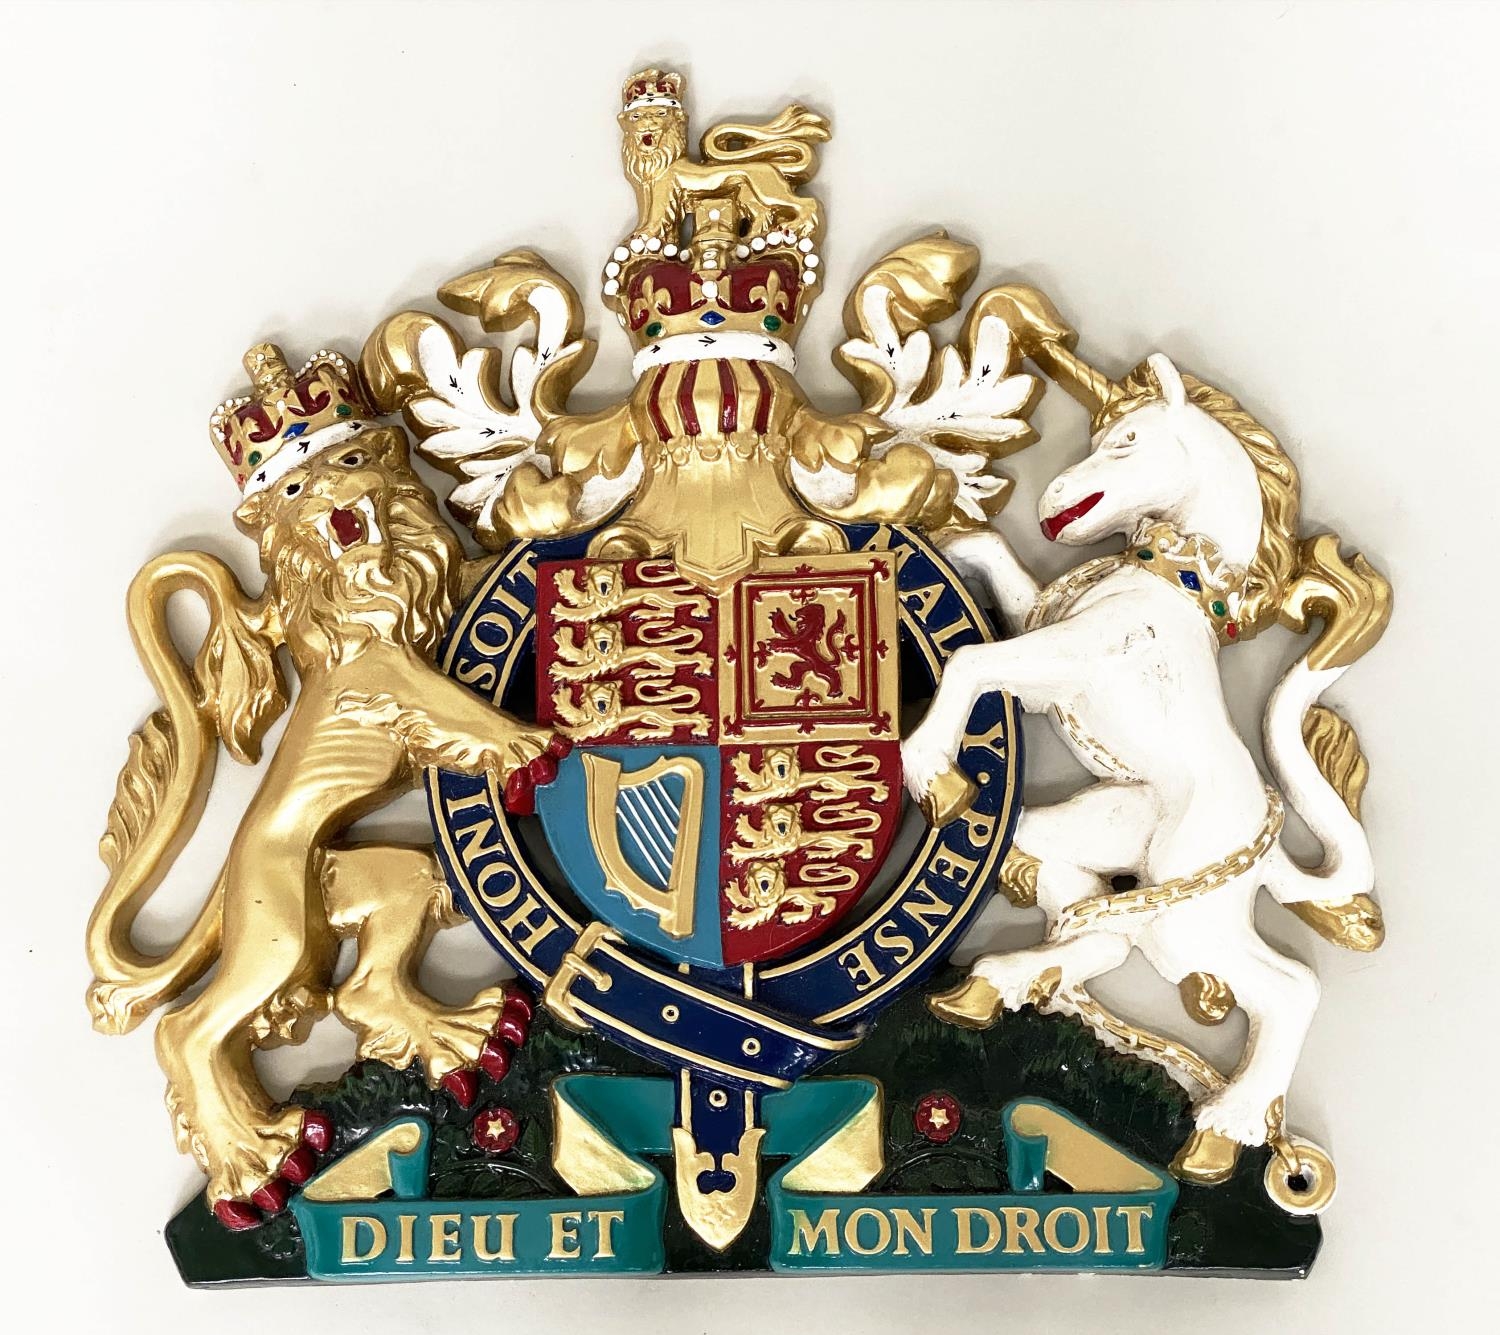 ROYAL COAT OF ARMS, painted fiberglass armorial coat of arms, 38cm x 41cm. - Image 2 of 4